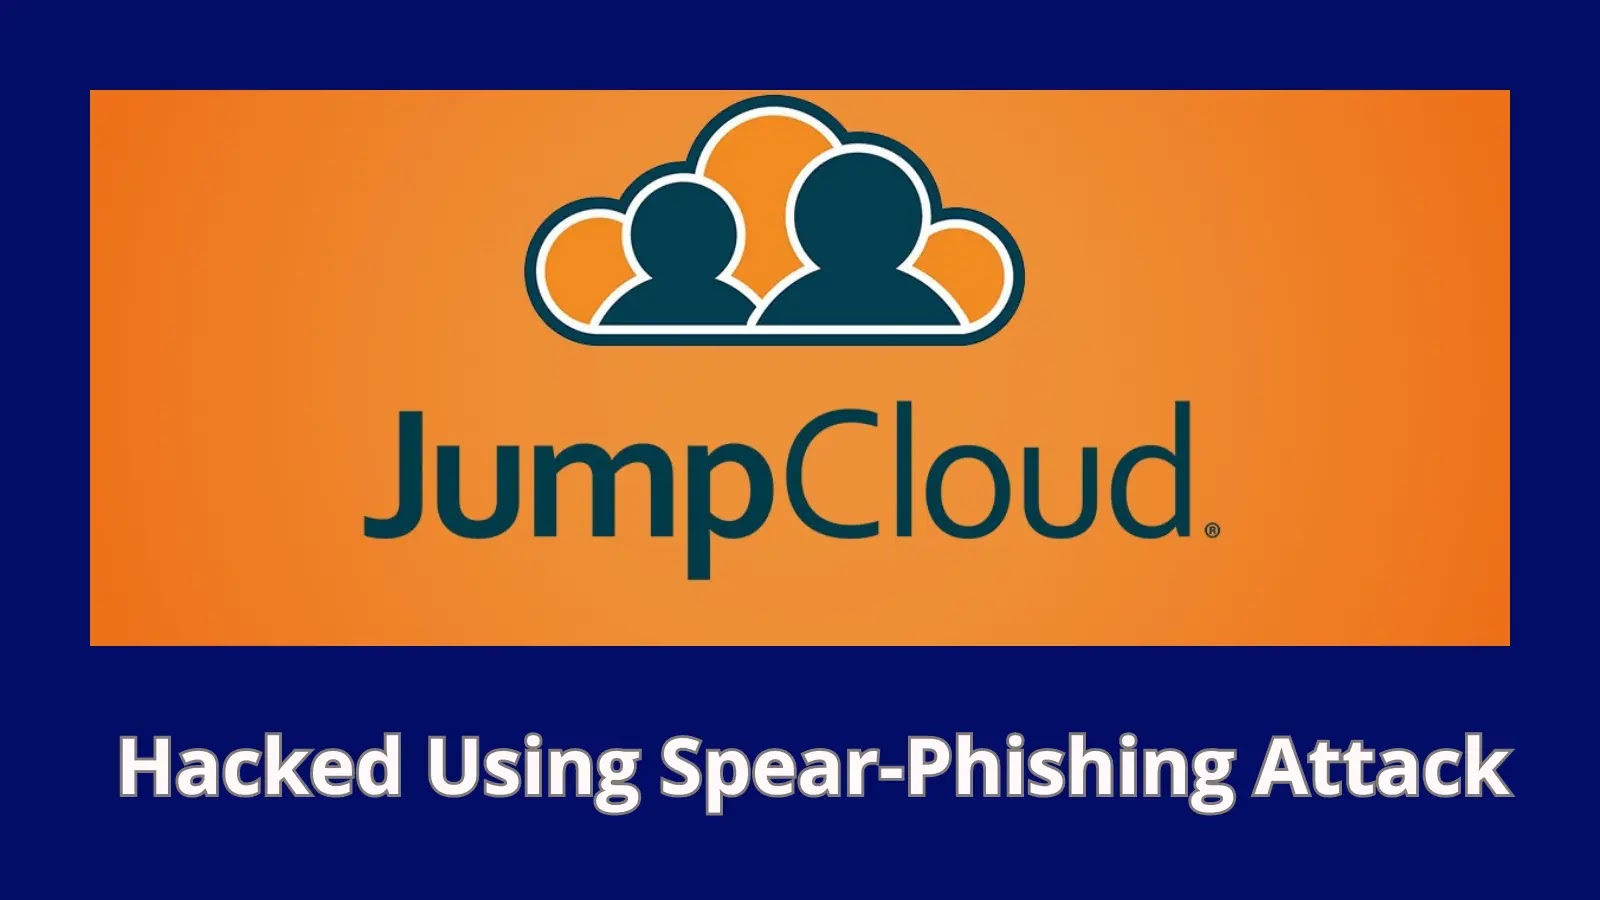 JumpCloud Hacked –  Hackers Breached The Systems Via Spear-Phishing Attack